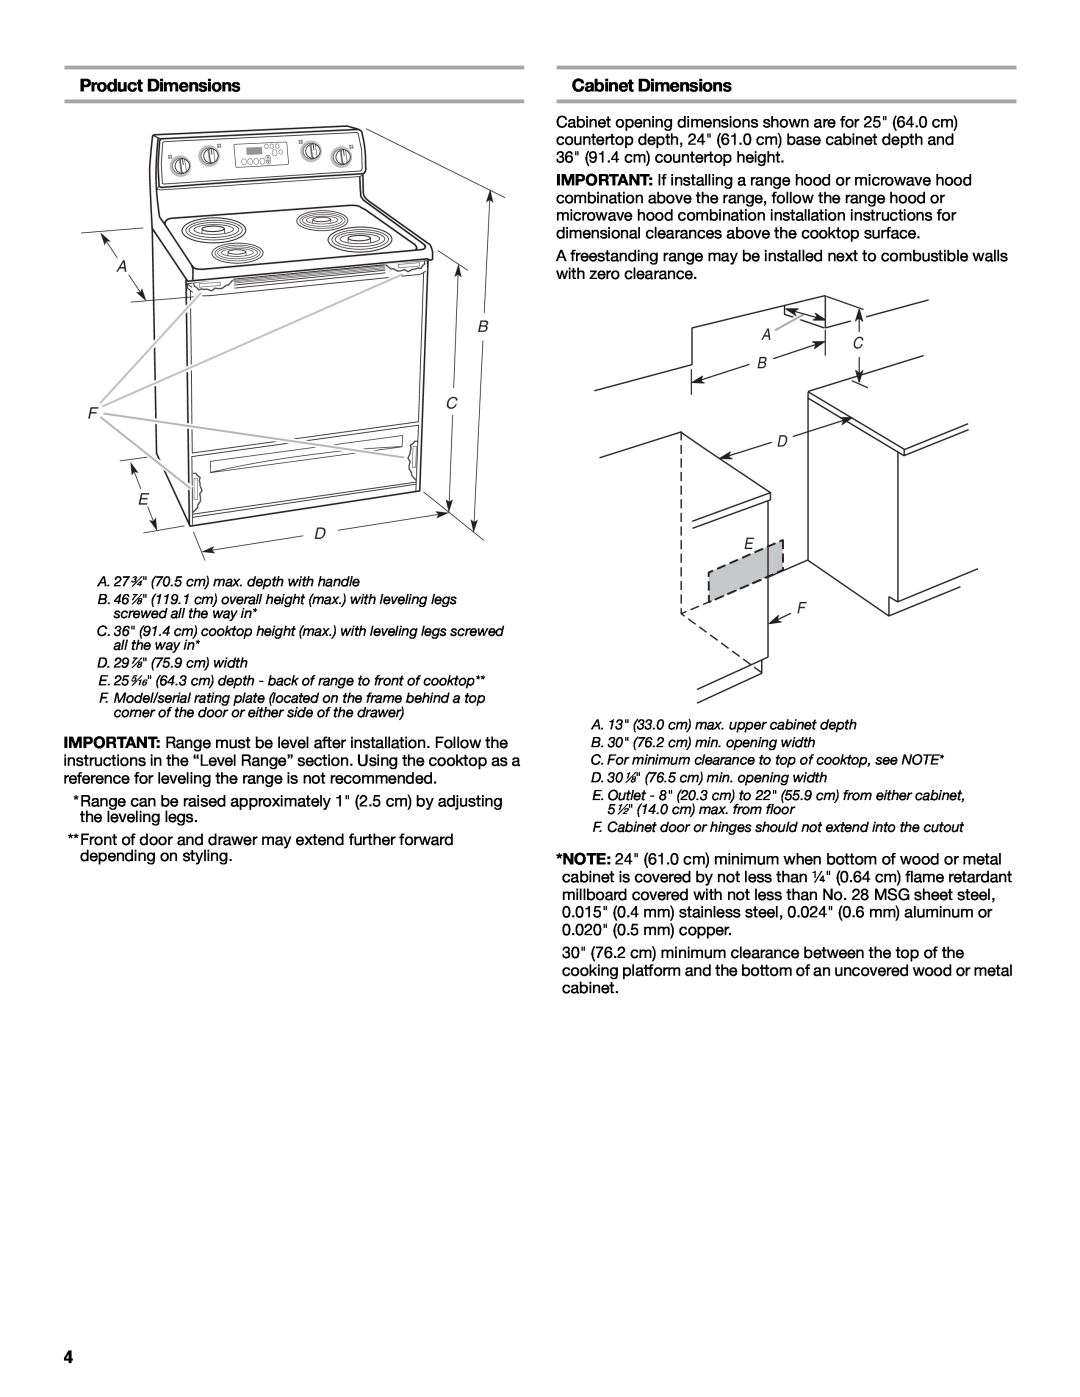 Whirlpool W10403811C installation instructions Product Dimensions, Cabinet Dimensions, A C B D 